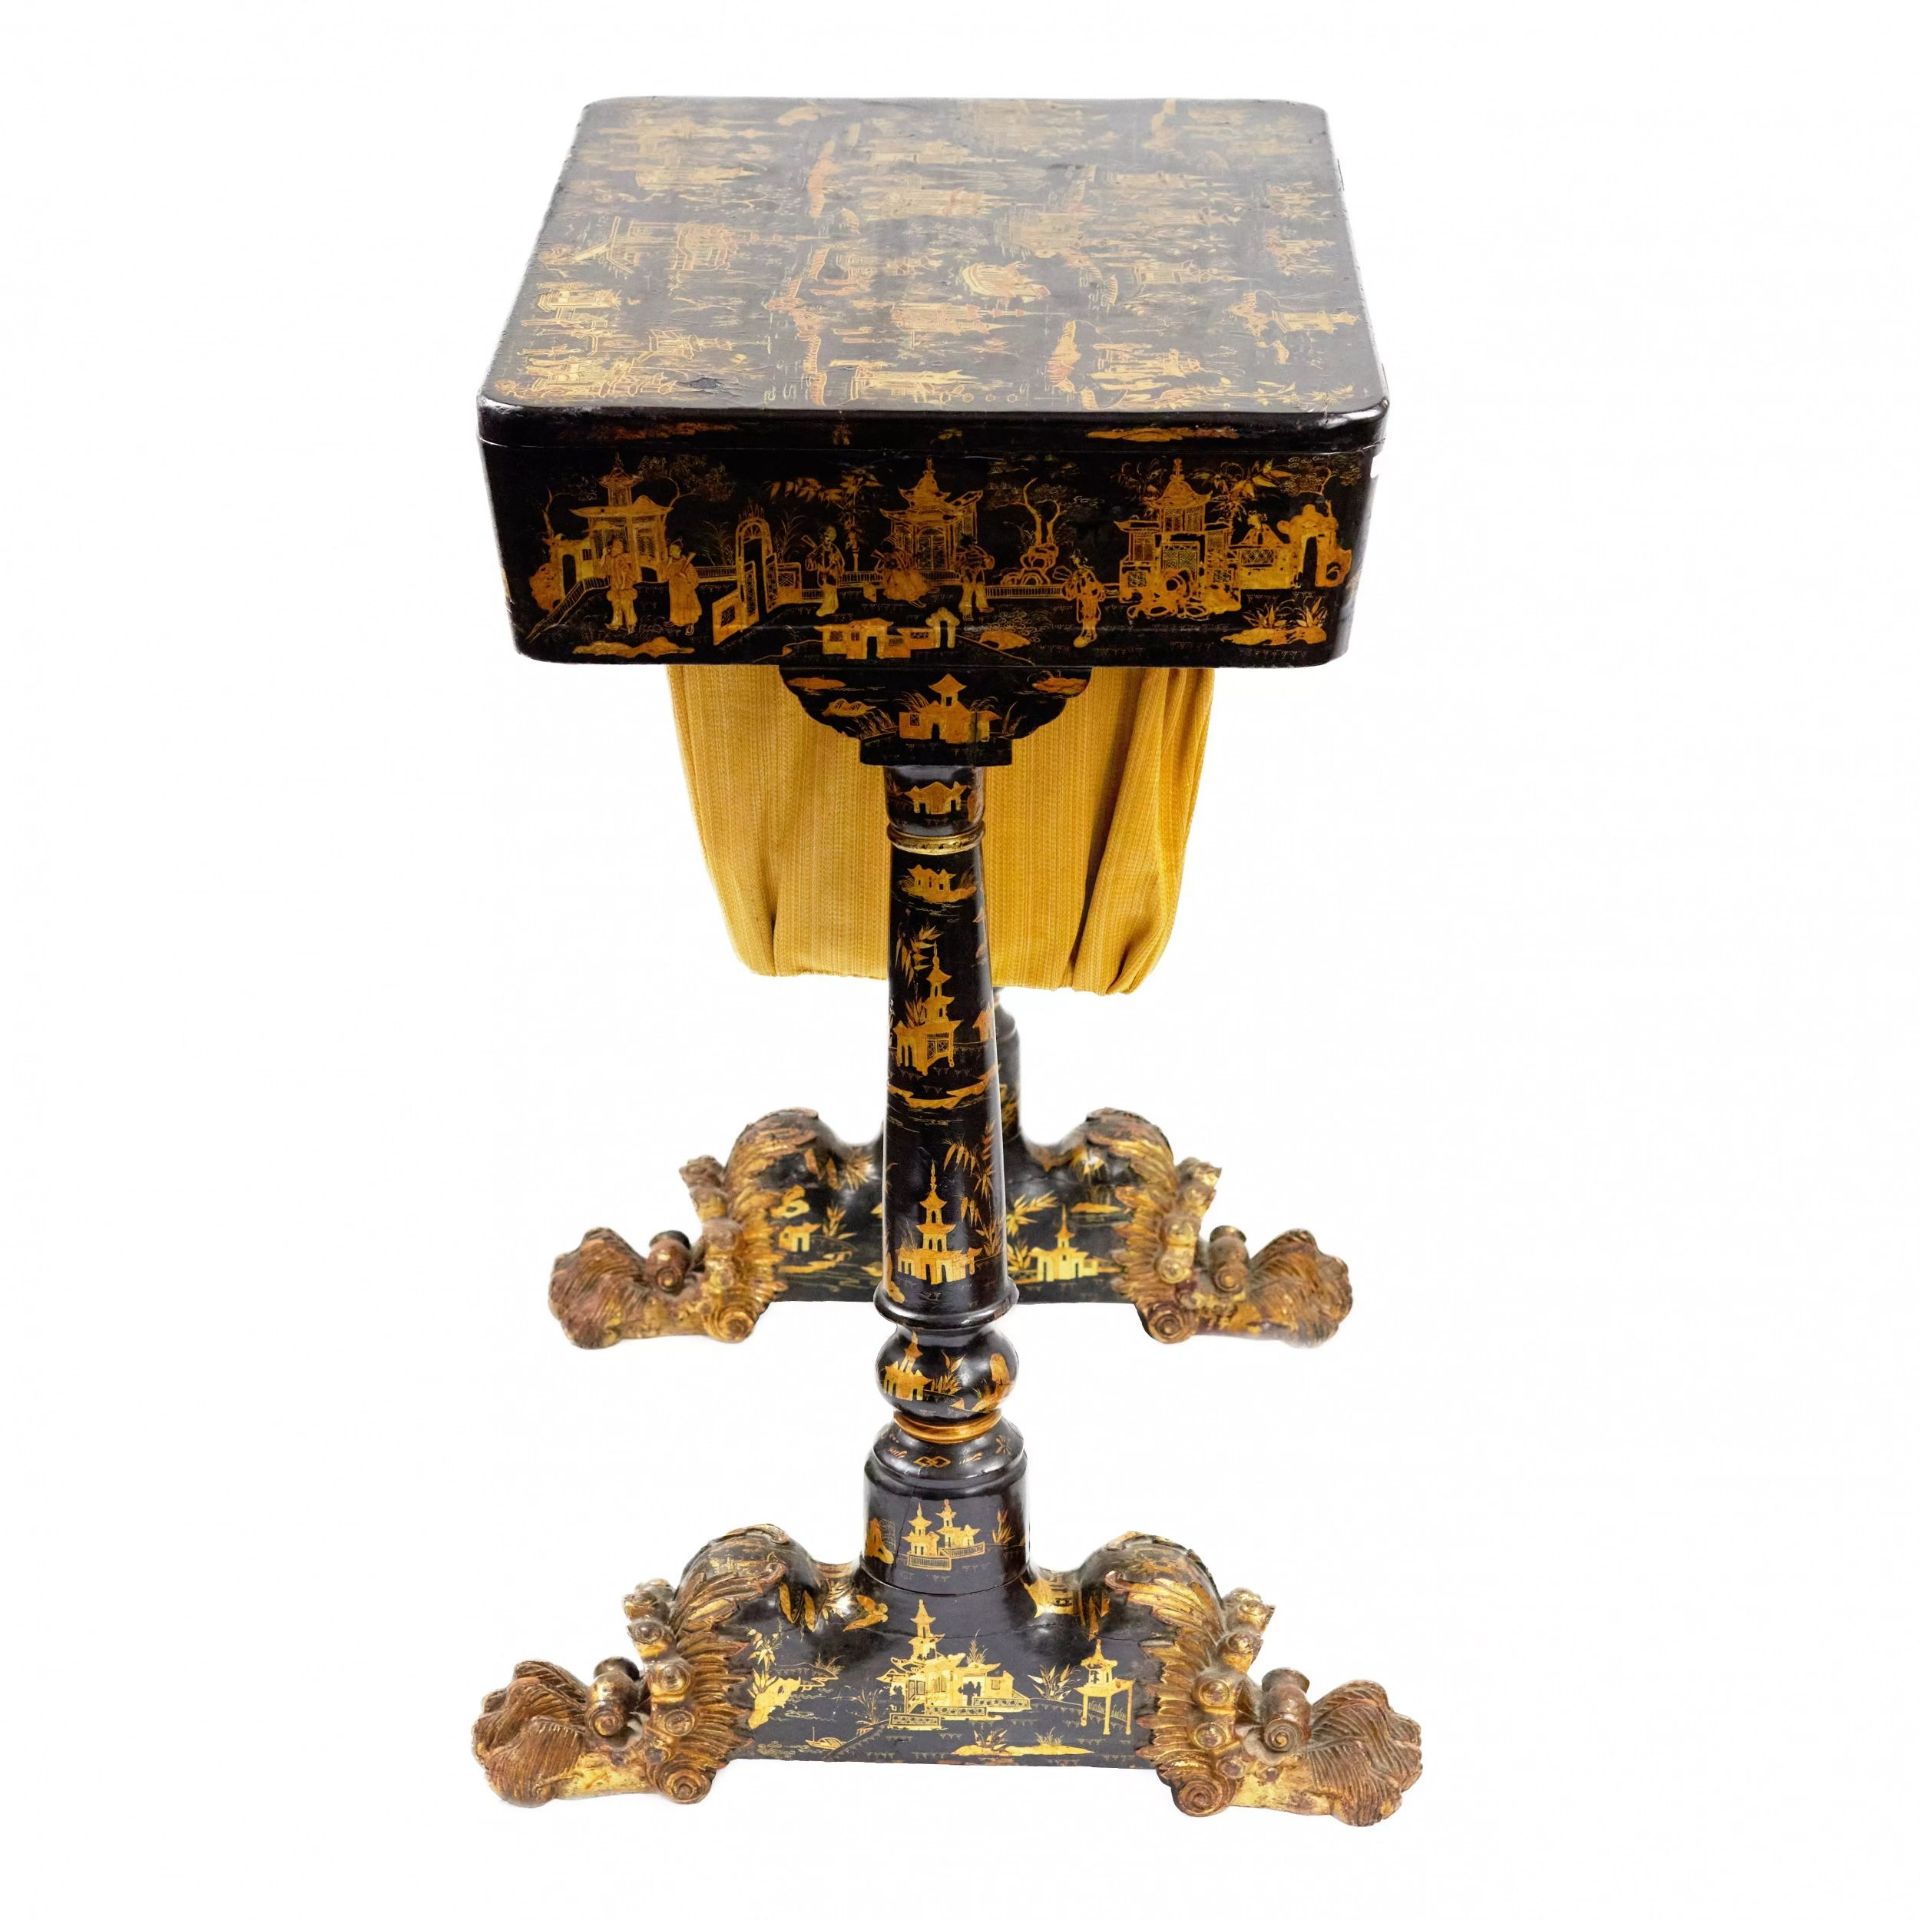 Needlework table made of black and gold Beijing lacquer. 19th century. - Image 4 of 11